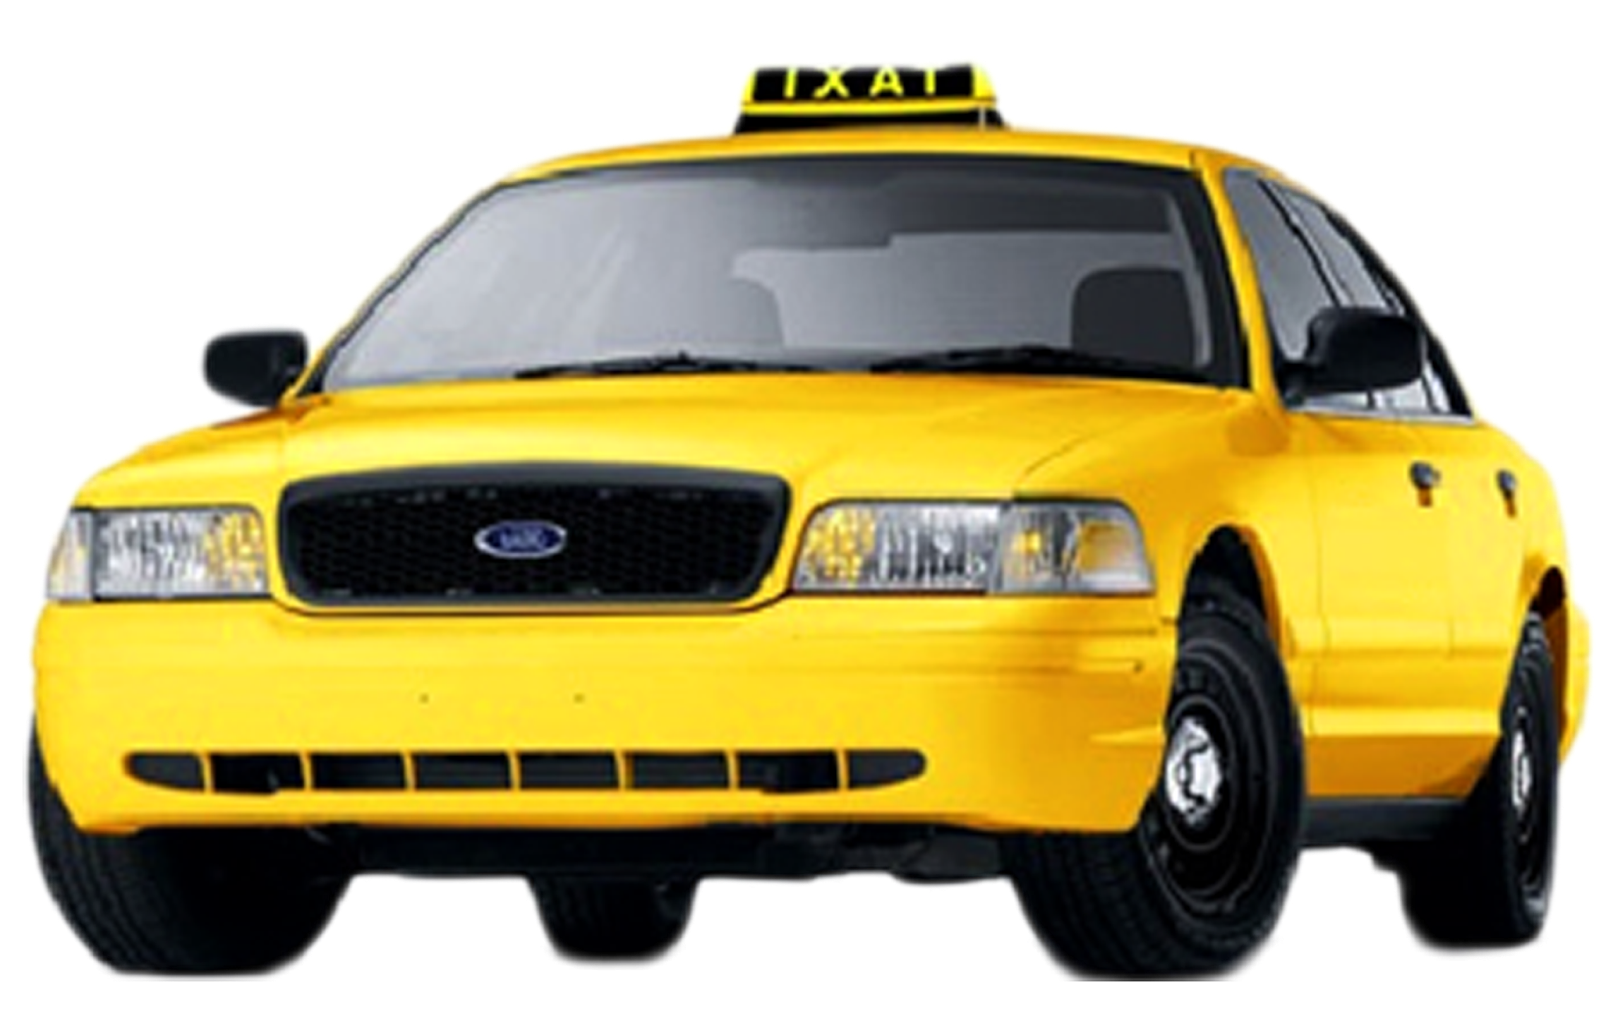 Download PNG image - Taxi Cab